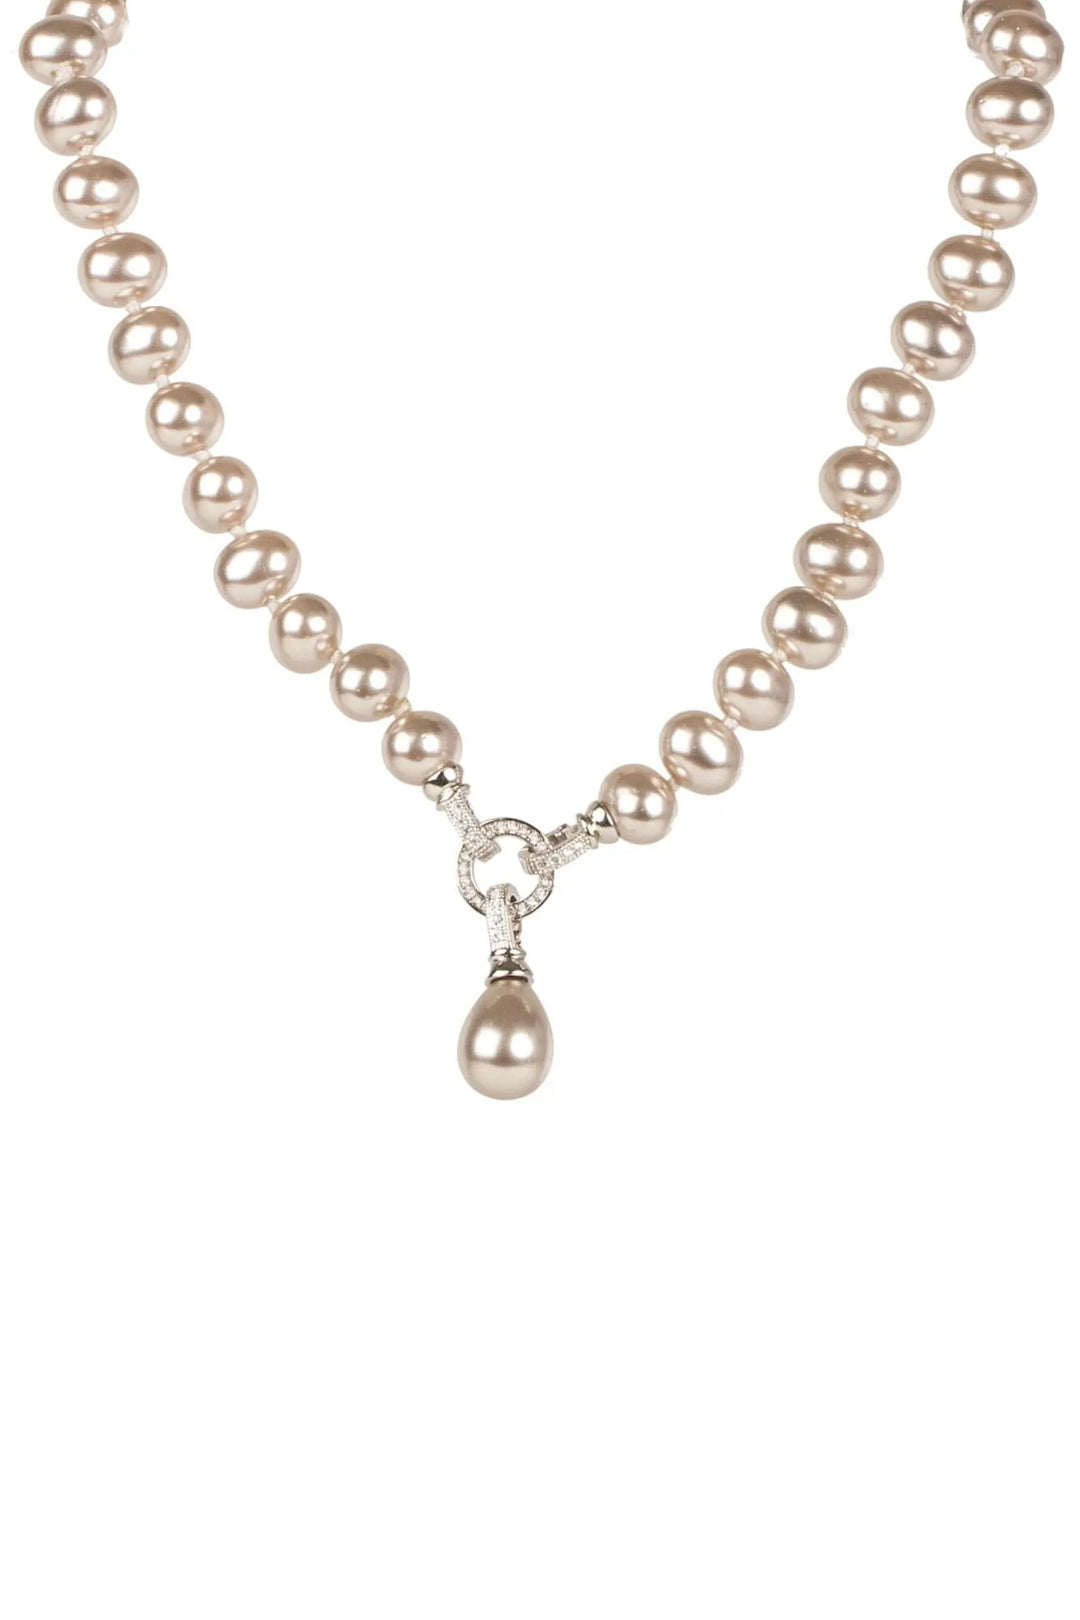  Paramount Pearl Necklace Silver